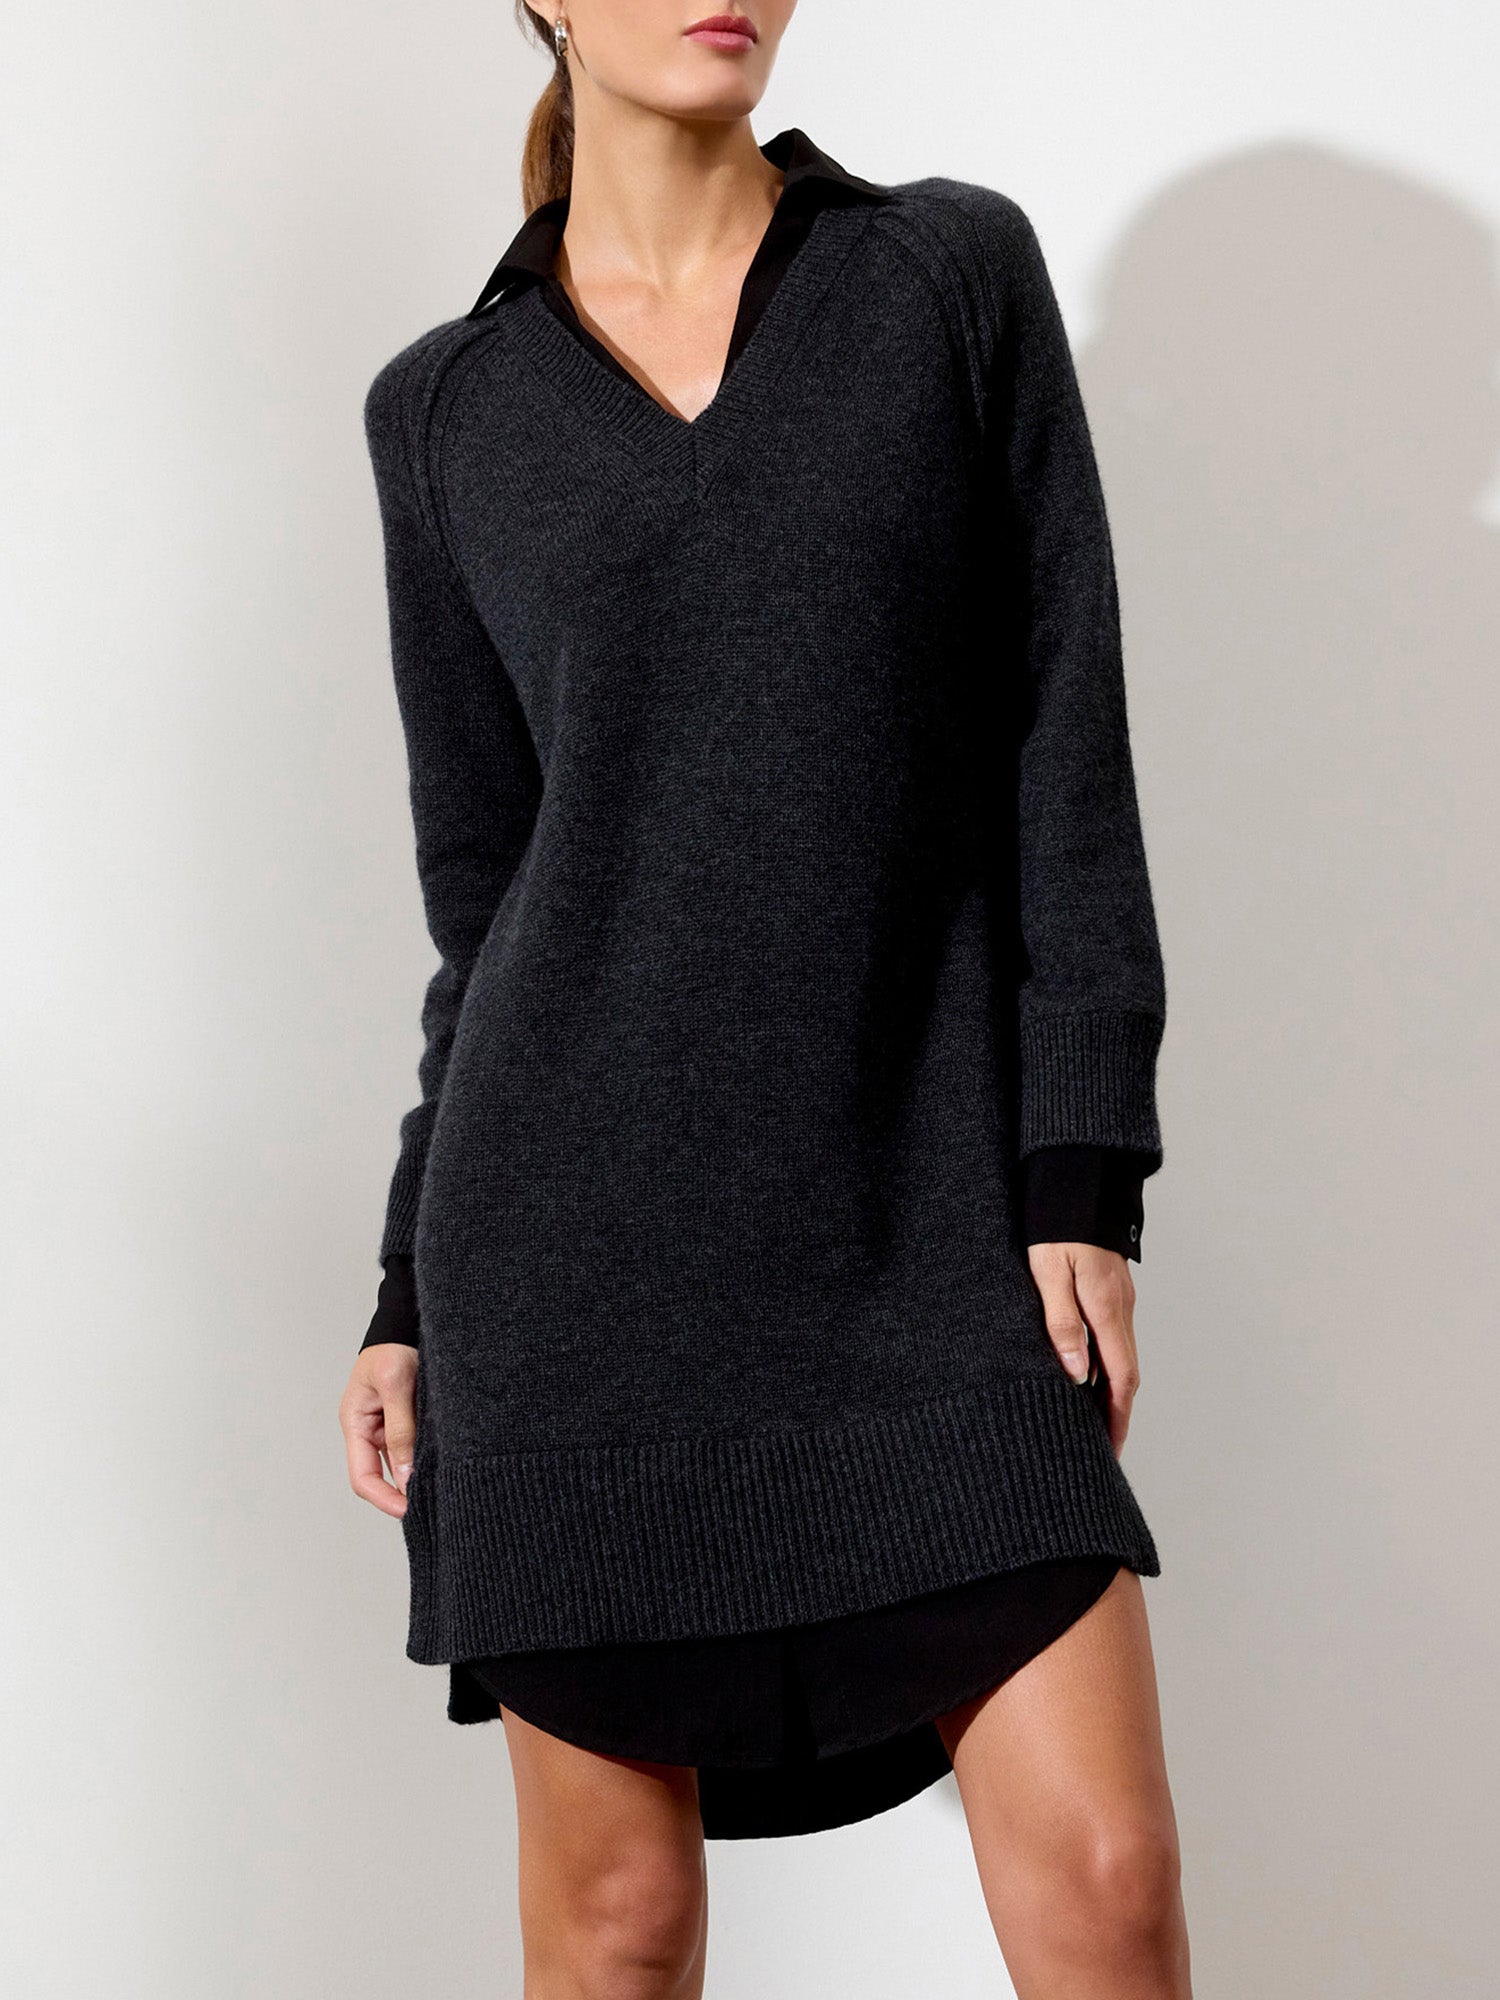 Looker layered v-neck grey and black mini sweater dress front view